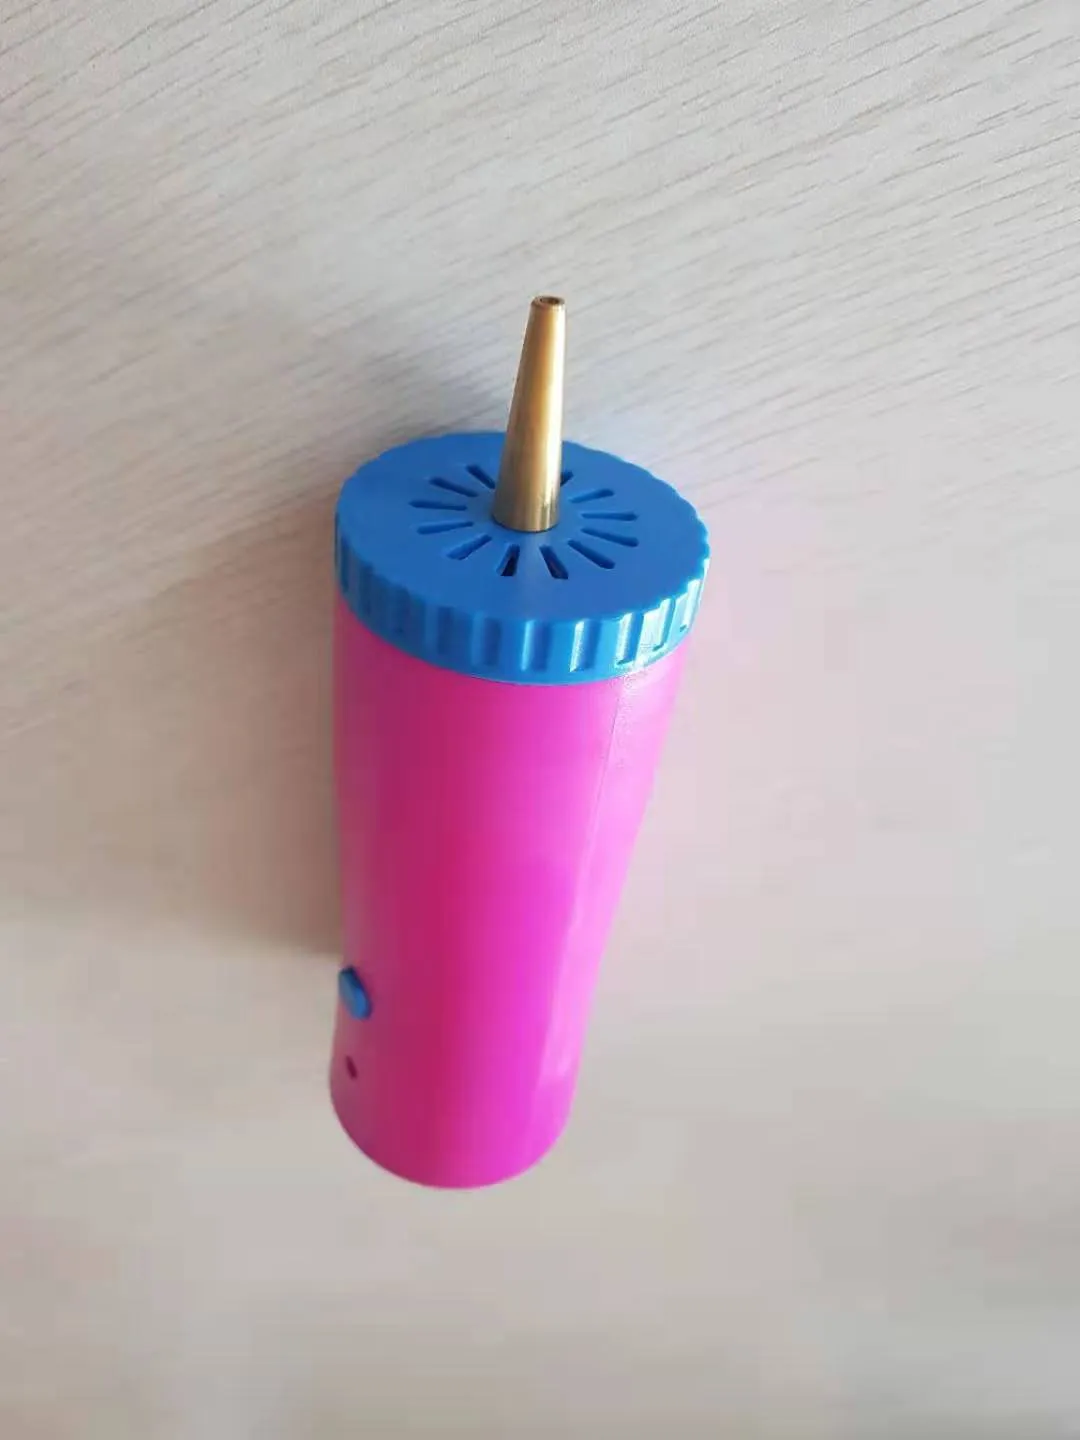 Electric Inflator Magic Twister Long Balloon Canister Pump, Balloon  Canister Inflator For Party Decorations From Johnliao, $31.57